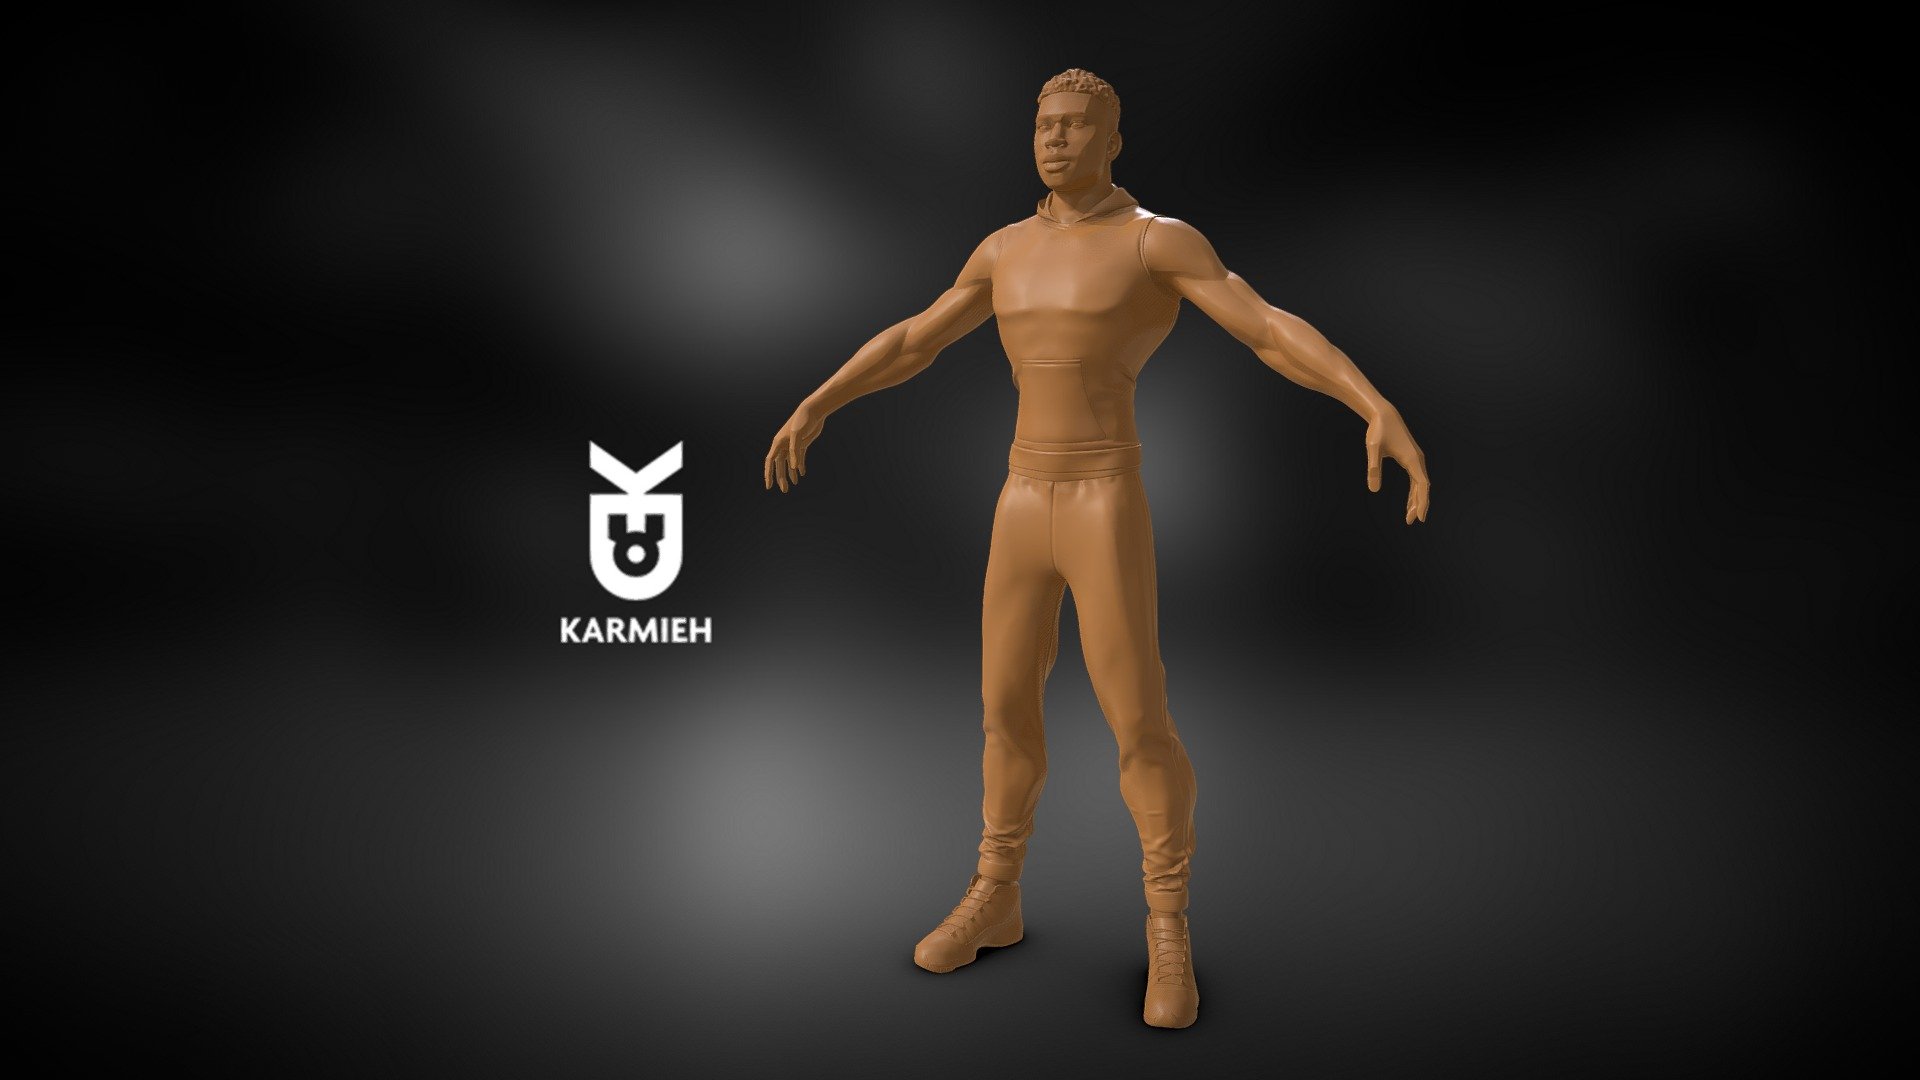 I sculpted Giannis Antetokounmpo for the  Milko Ad, It was an amazing project to be part of.
https://www.youtube.com/watch?v=c5pbsSh1PxI

Sculpted in ZBrush
Clothing done in Marvelous Designer - Giannis Antetokounmpo - 3D model by Oasim Karmieh (@pixelbudah) 3d model